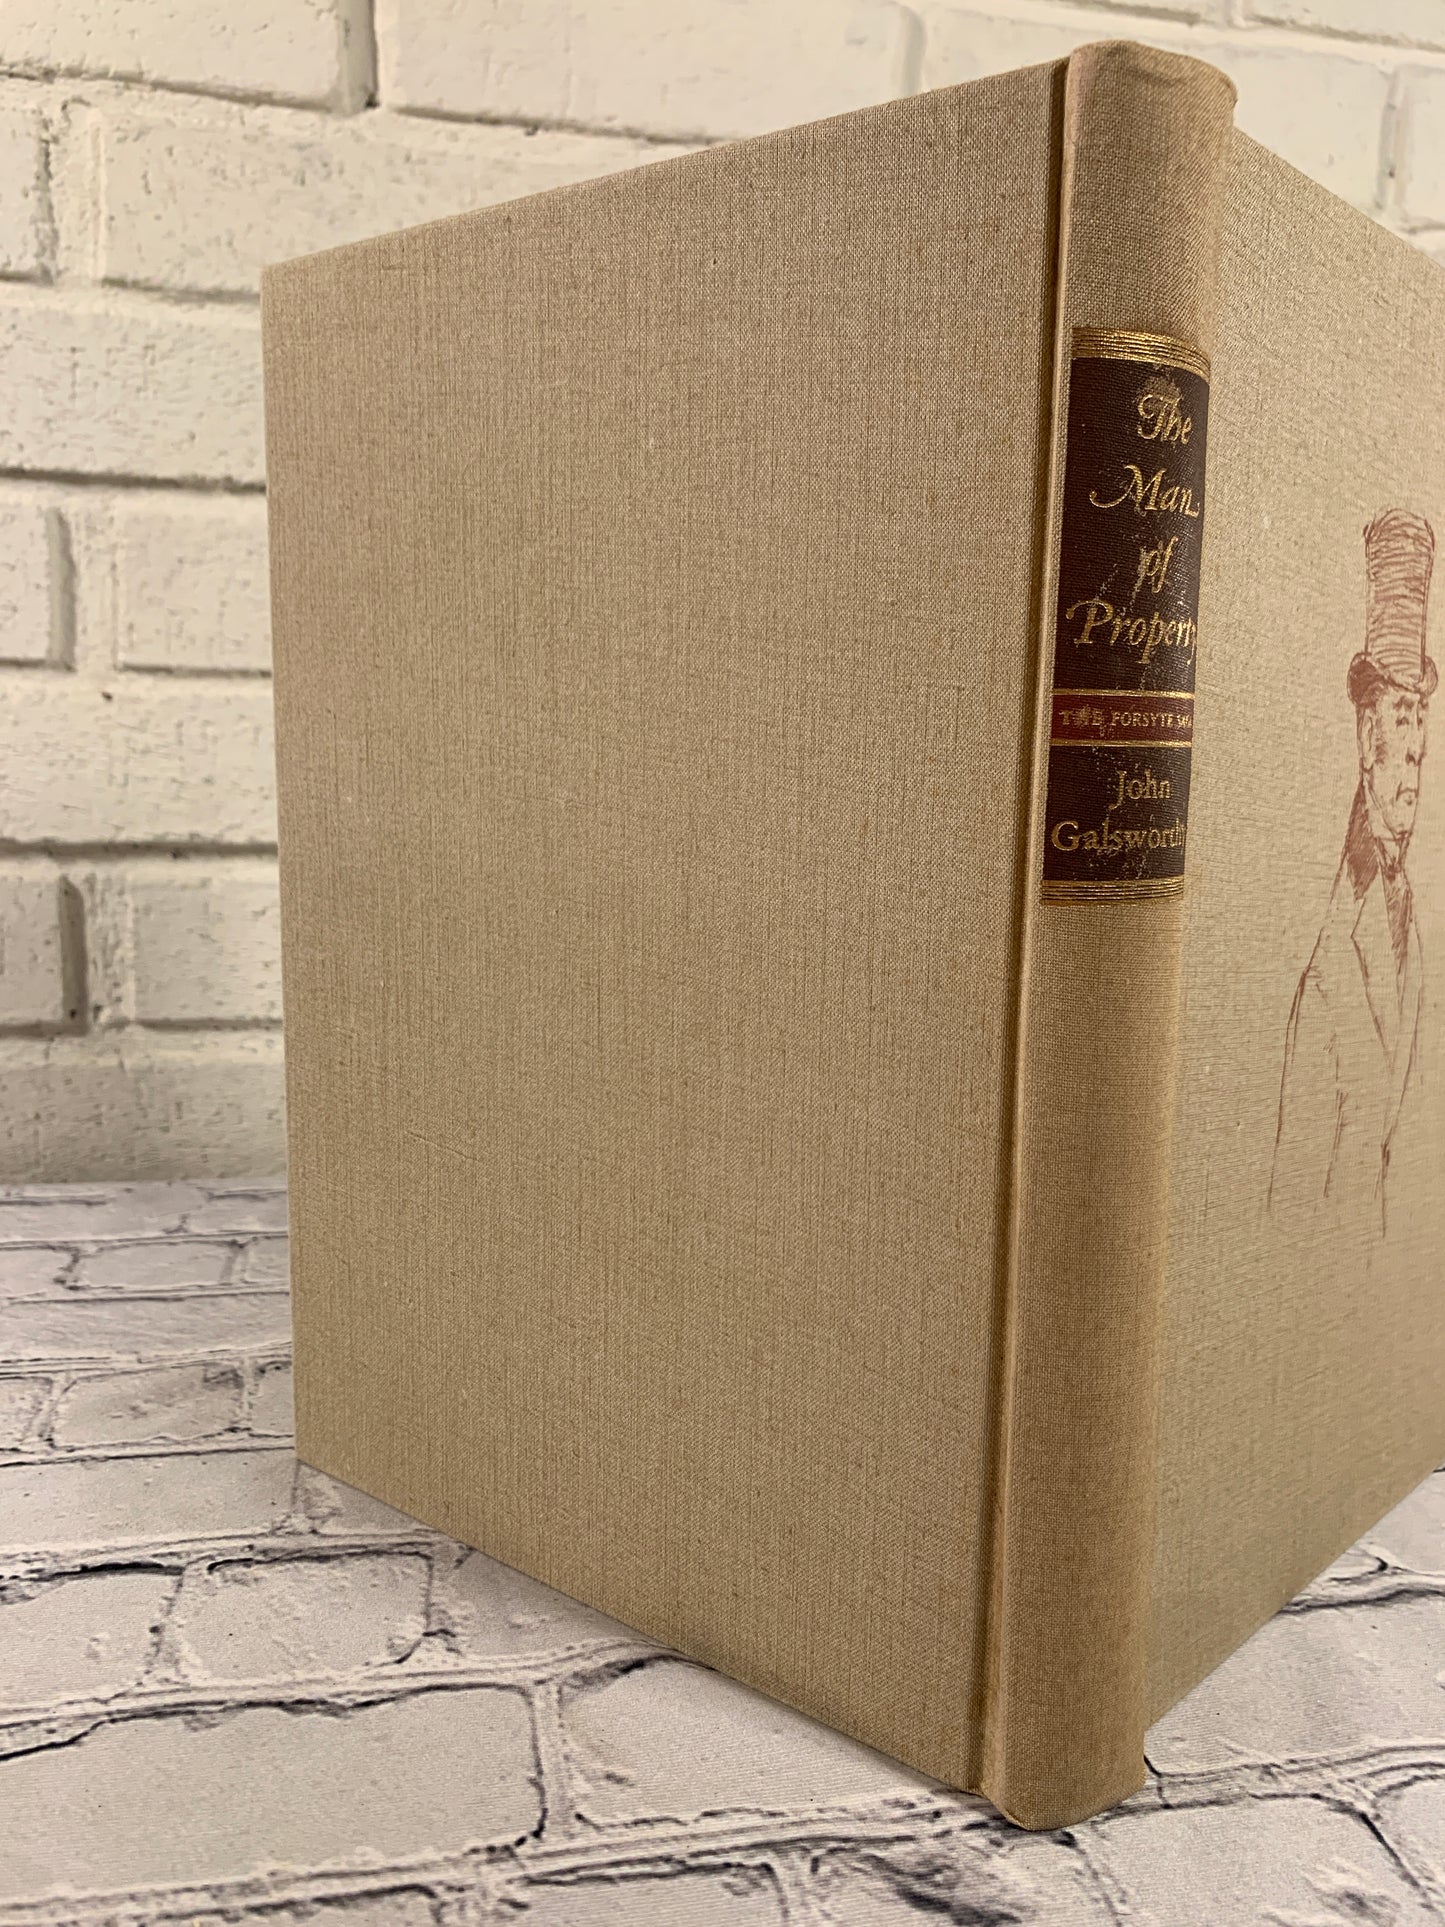 The Man of Property by John Galsworthy [1964 · Heritage Press]